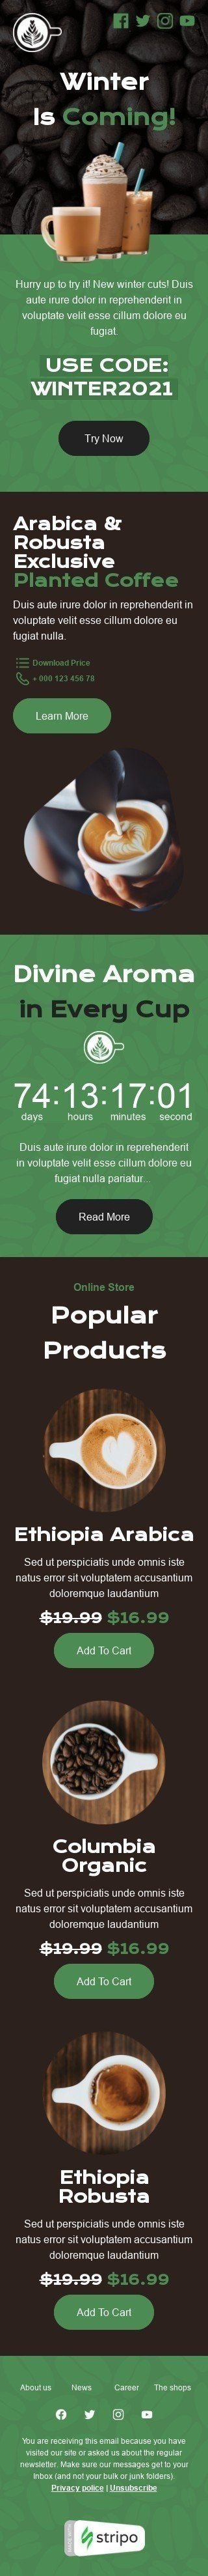 Winter Email Template "Arabica & Robusta" for Beverages industry mobile view